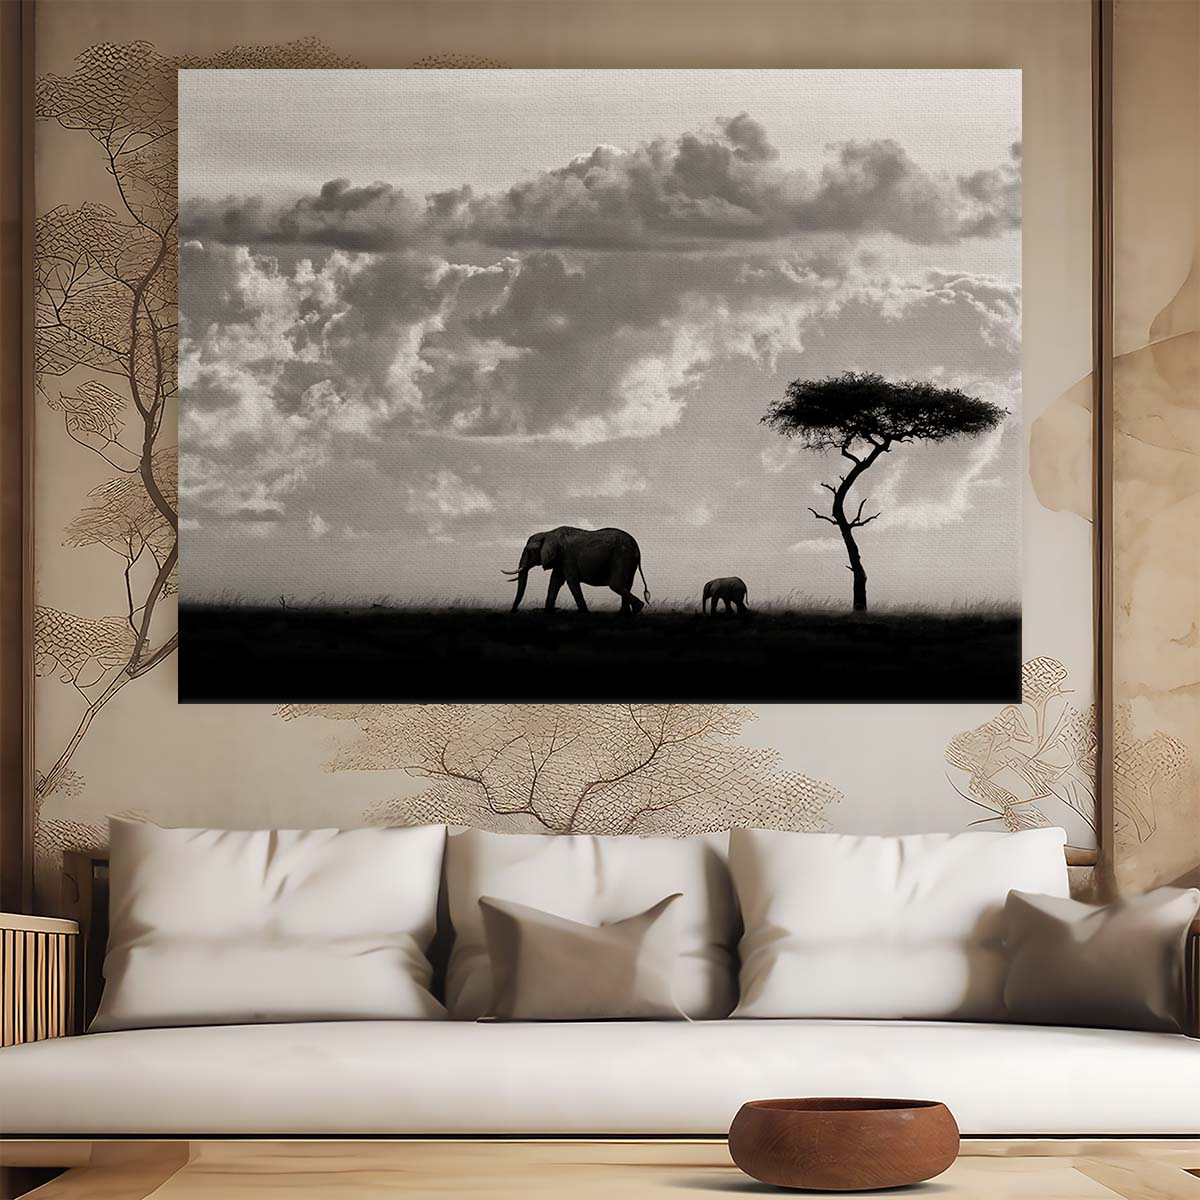 Majestic African Elephant Family Silhouette Wall Art by Luxuriance Designs. Made in USA.